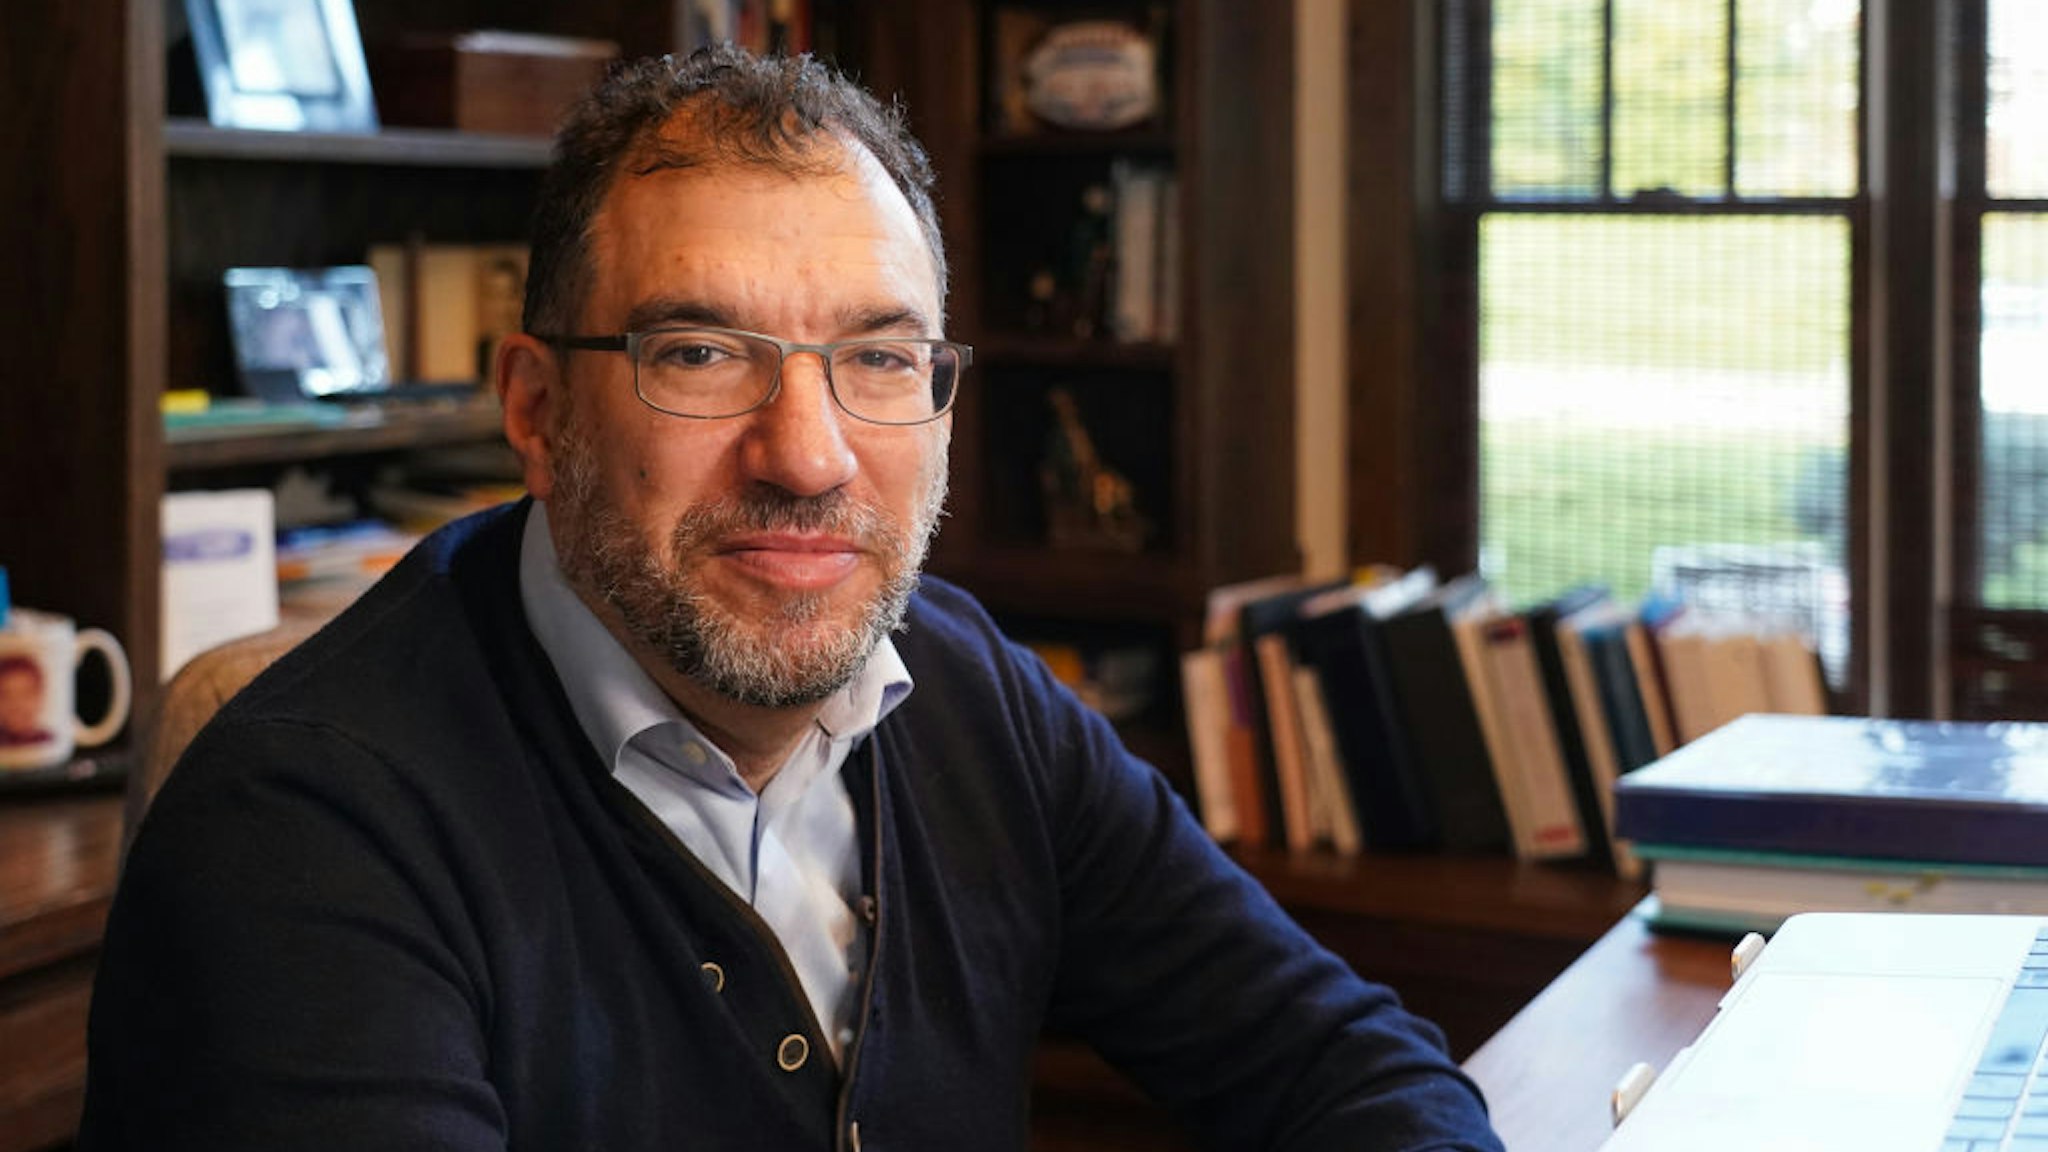 Andy Slavitt, a former health official in the Obama administration, in his home in Edina, MN, September 17, 2020.